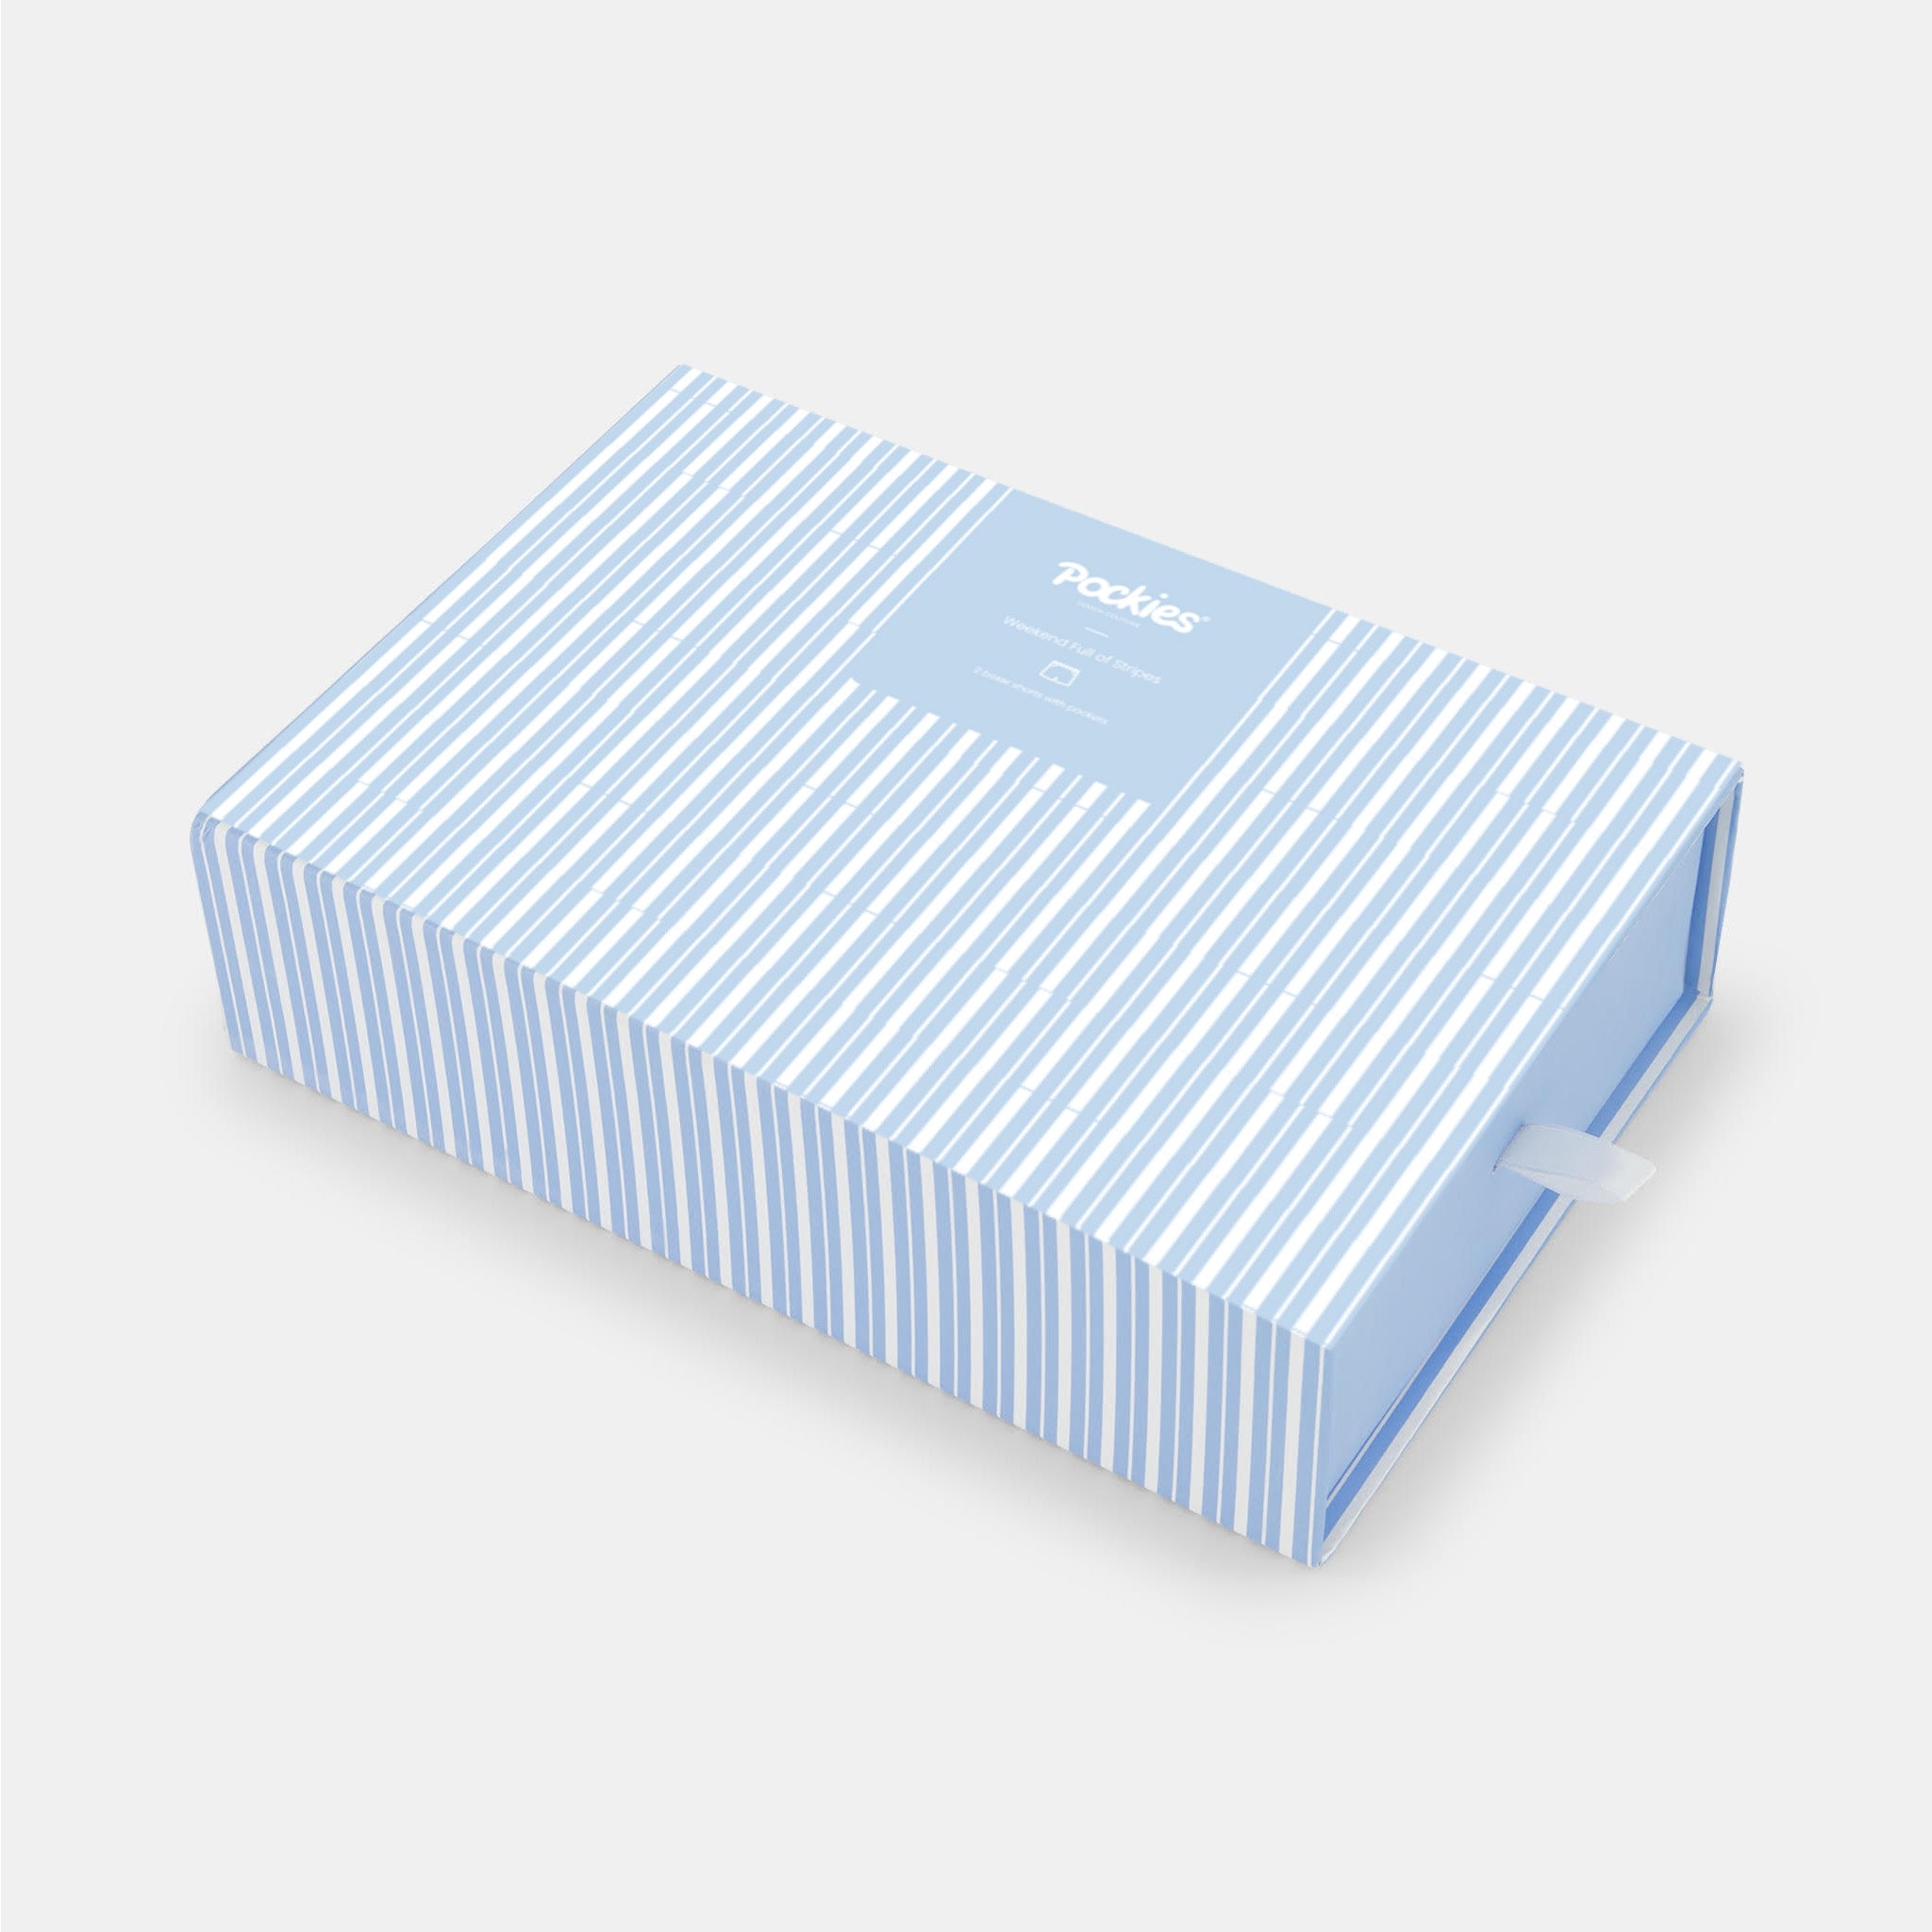 2-Pack Striped Gift Box